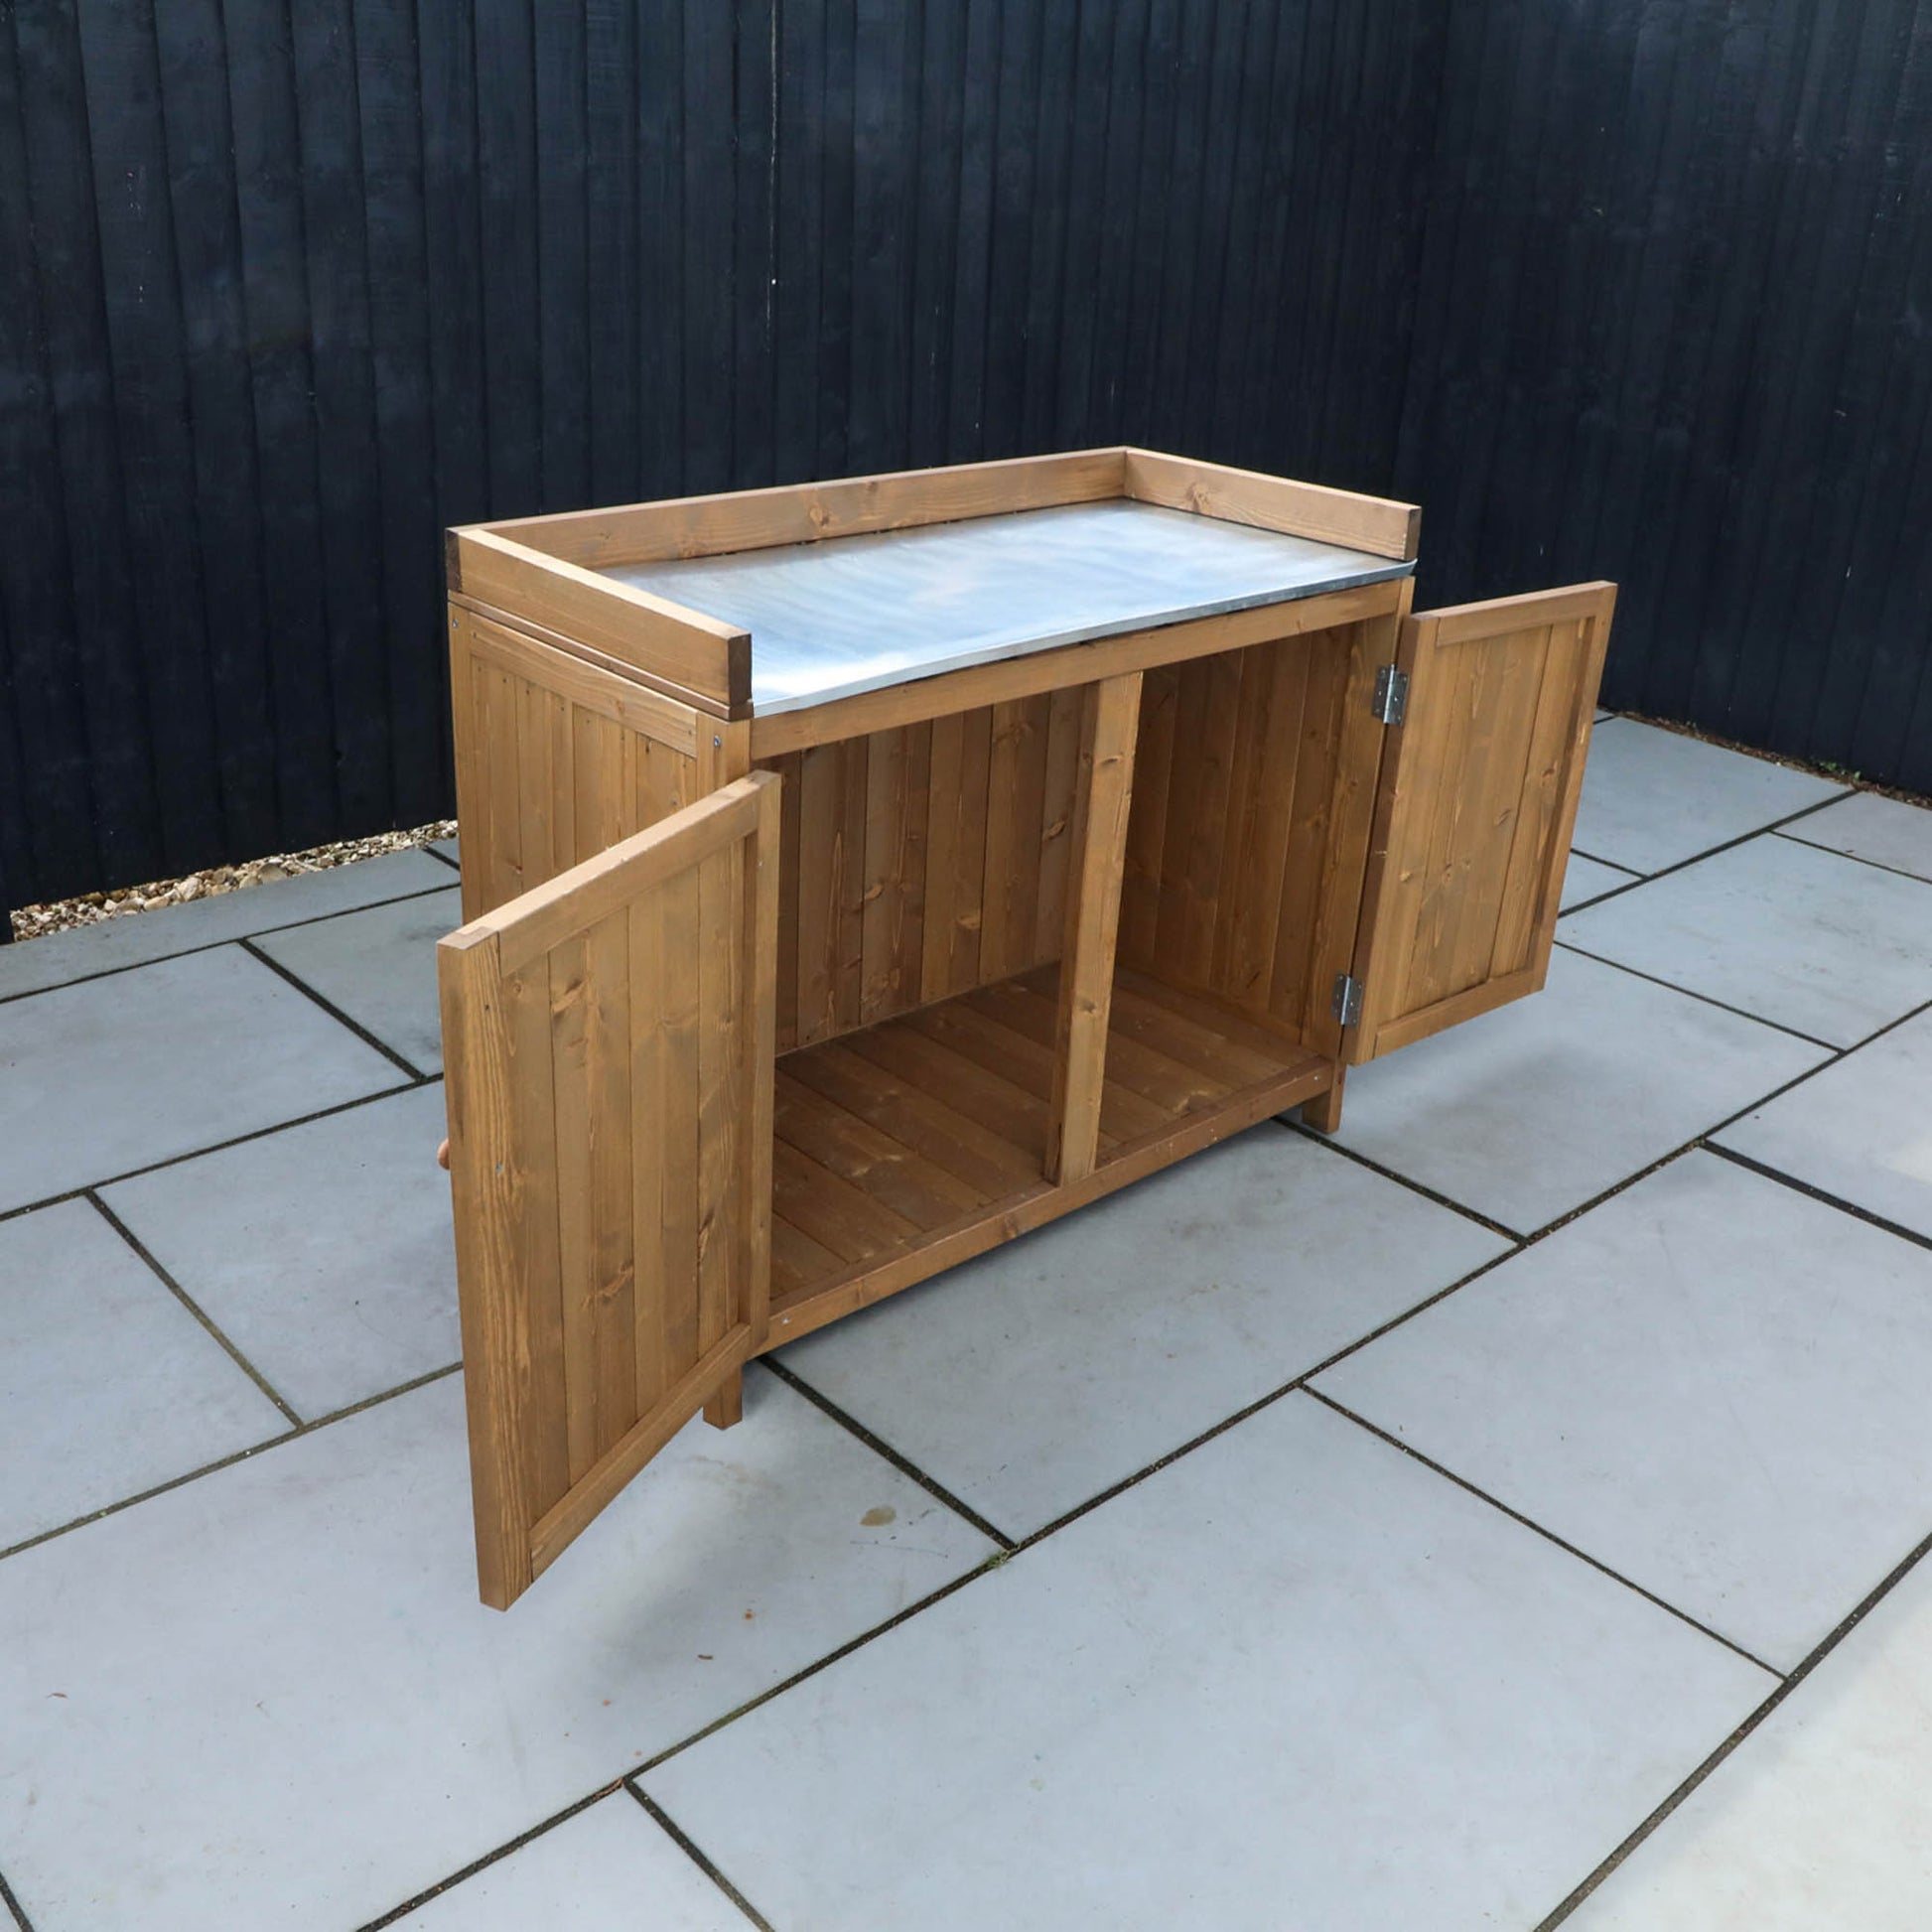 A timber unit that forms part of an outdoor kitchen